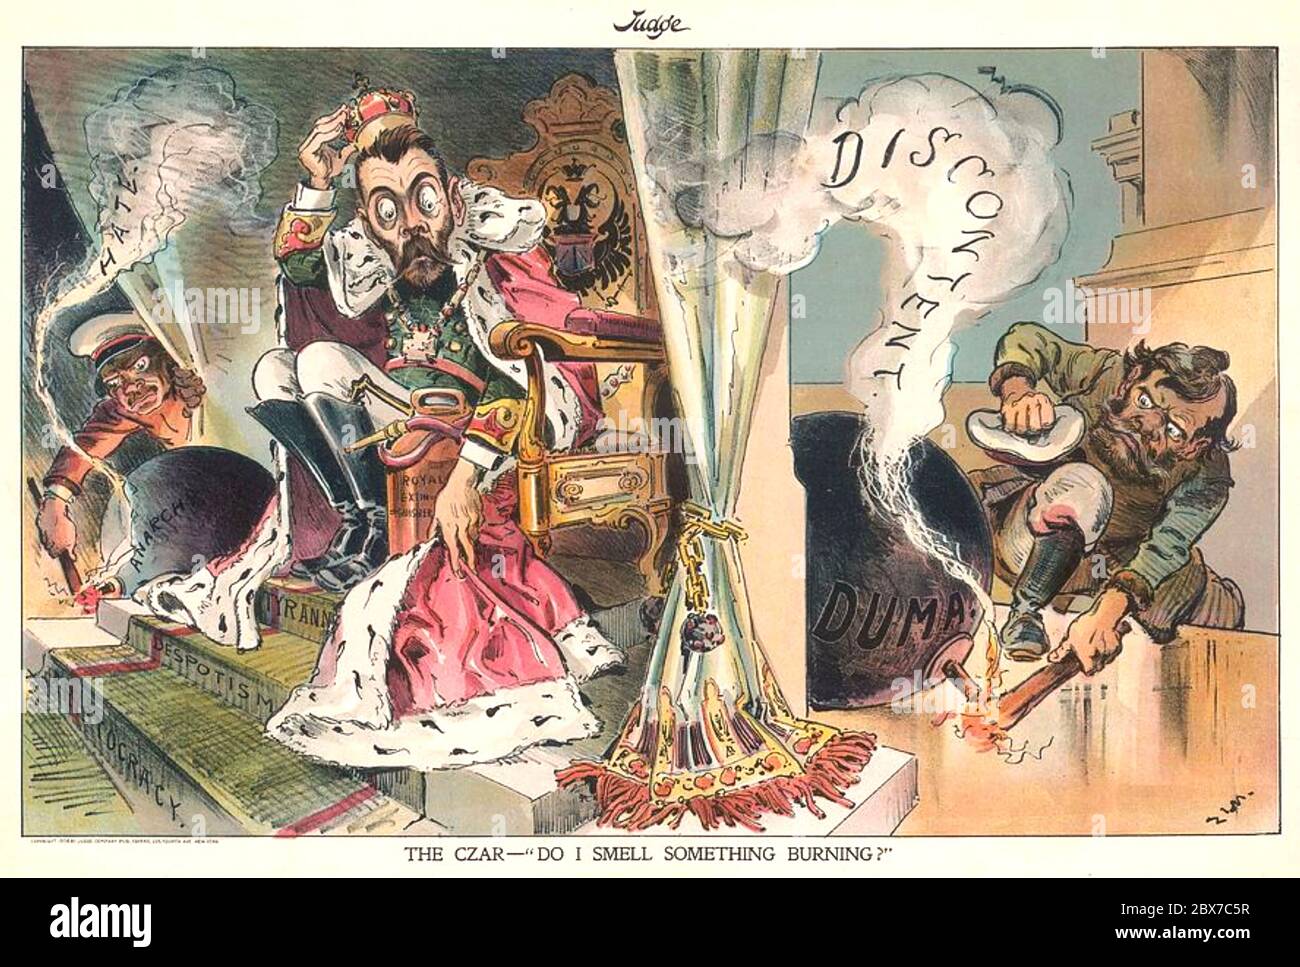 NICHOLAS II OF RUSSIA (1868-1918) faces unrest in a cartoon from the American satirical magazine Judge Stock Photo